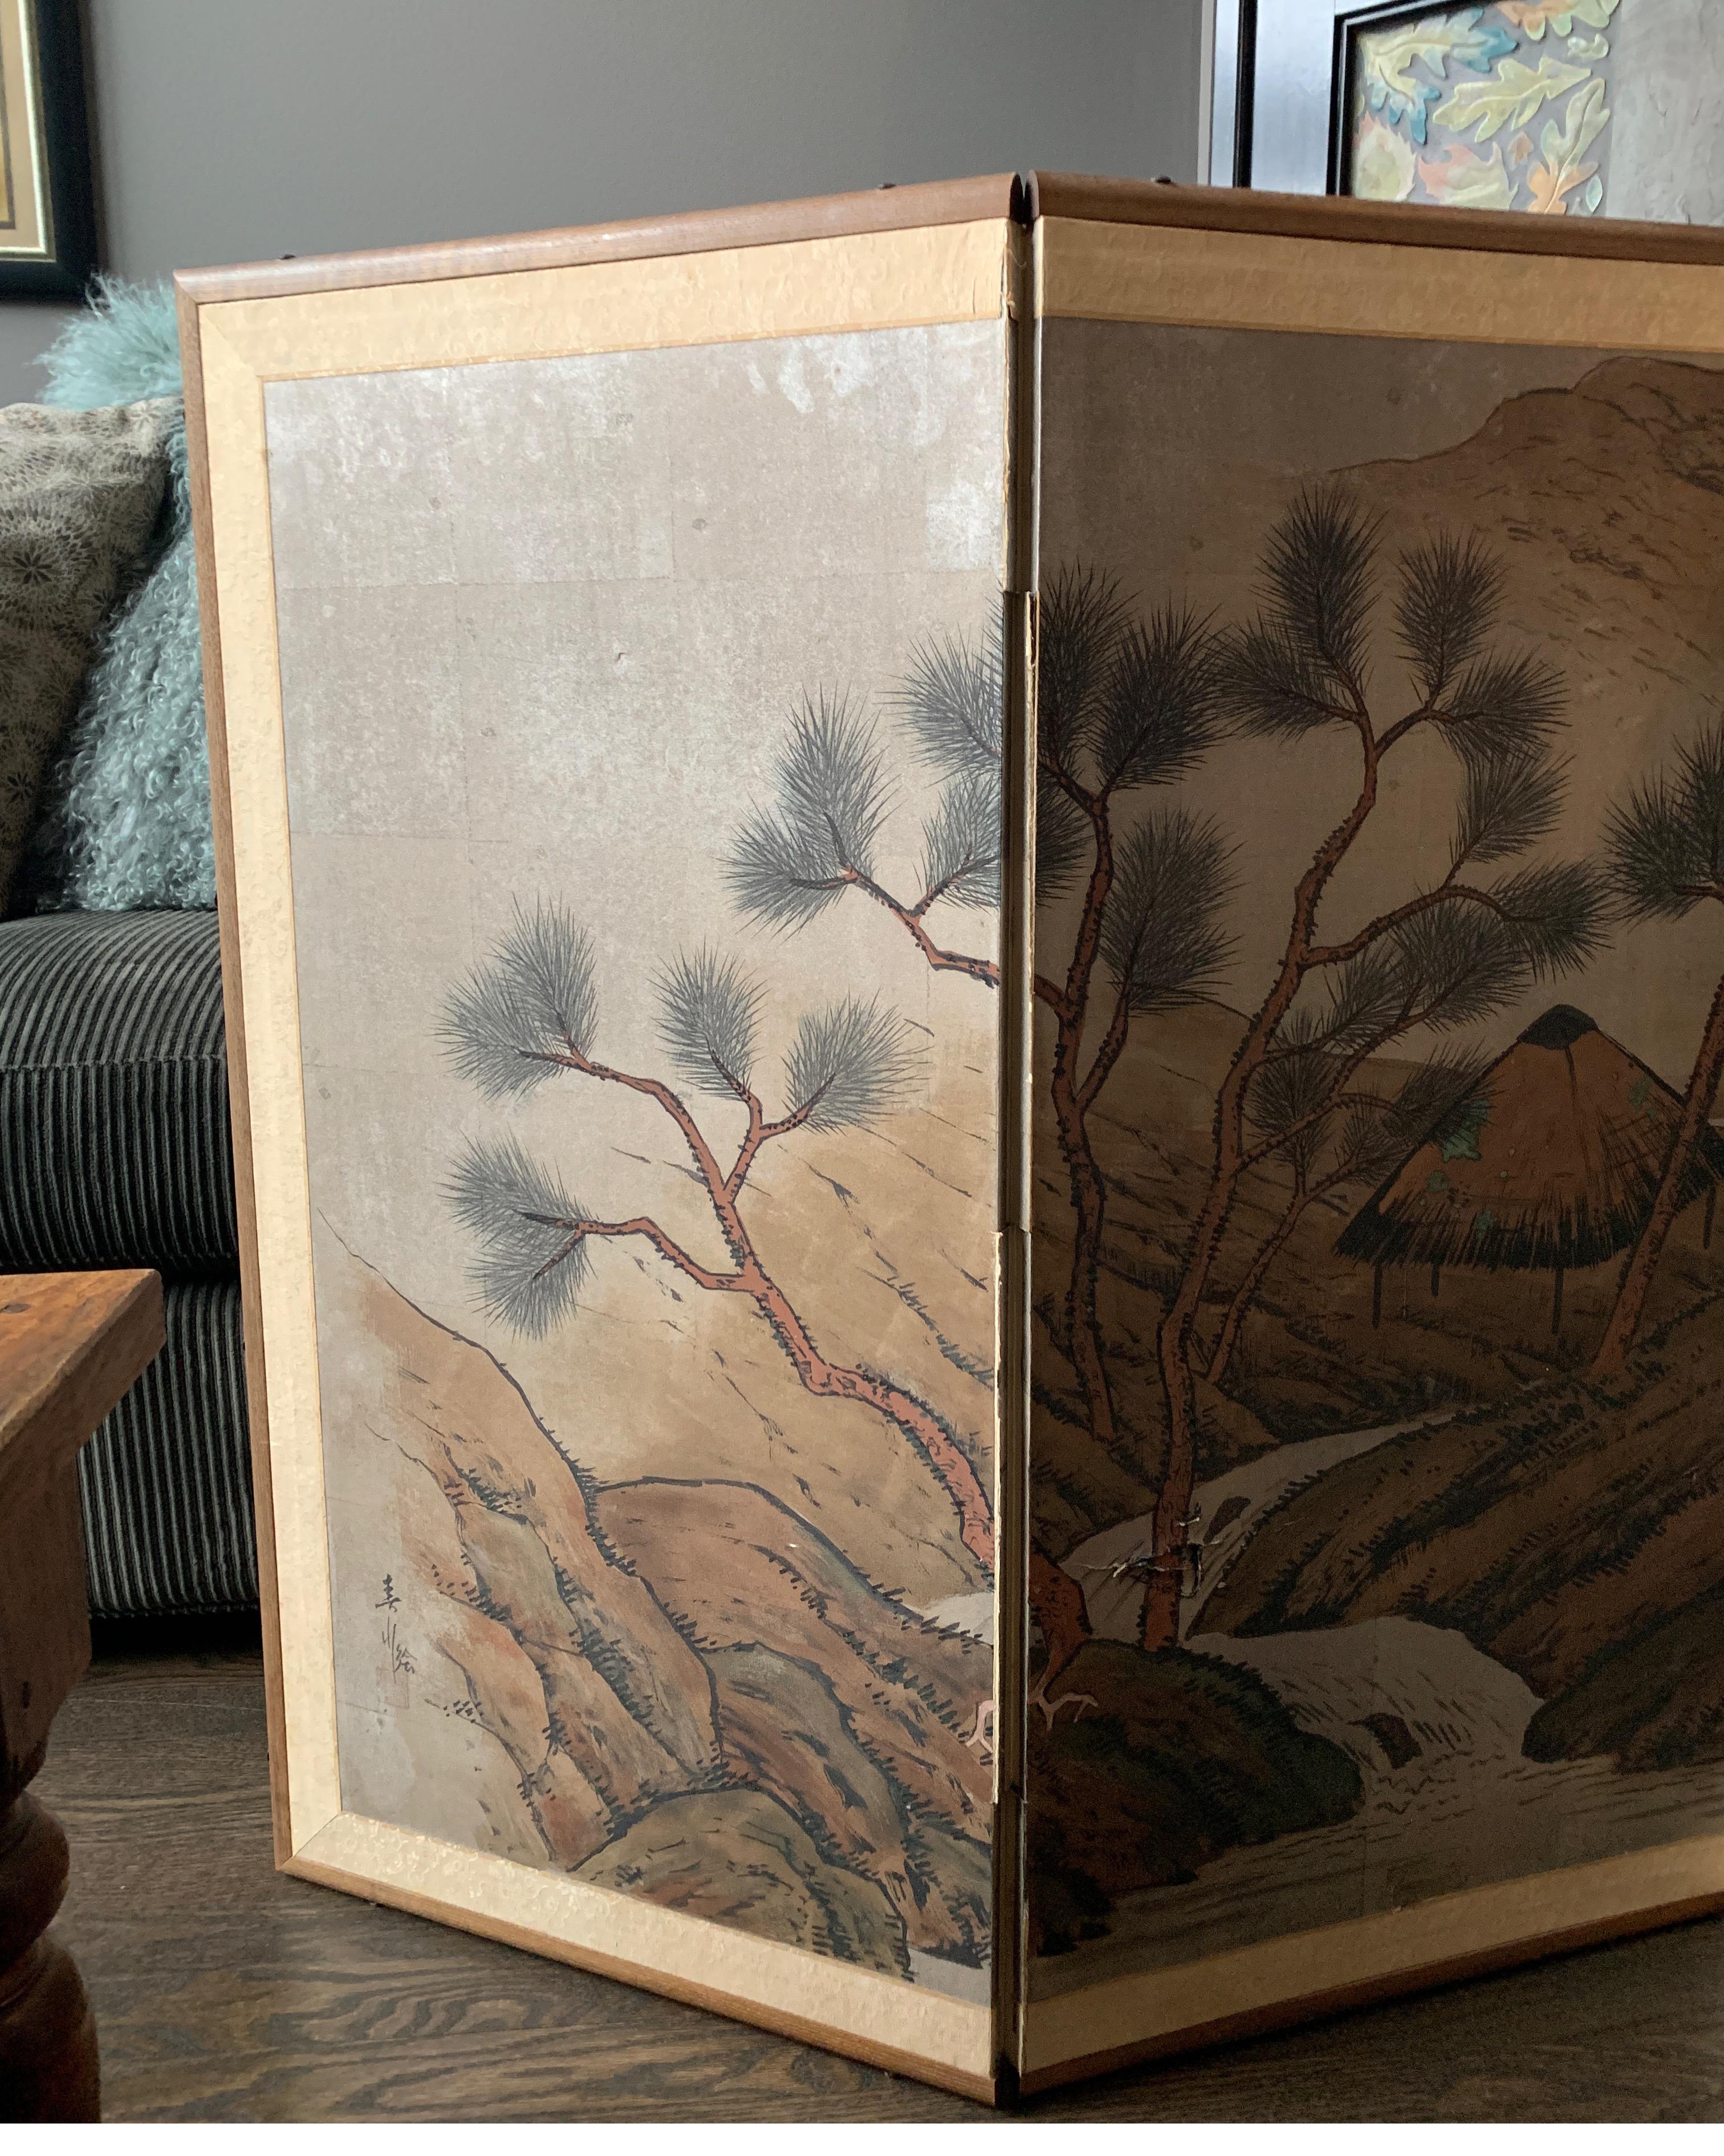 Midcentury Asian silk hand painted tabletop screen
Vintage four panel Asian silk
This screen is hand painted , a Japanese landscape on a neutral background
wooden frame
framed in light tan fabric/ ribbon boarder.